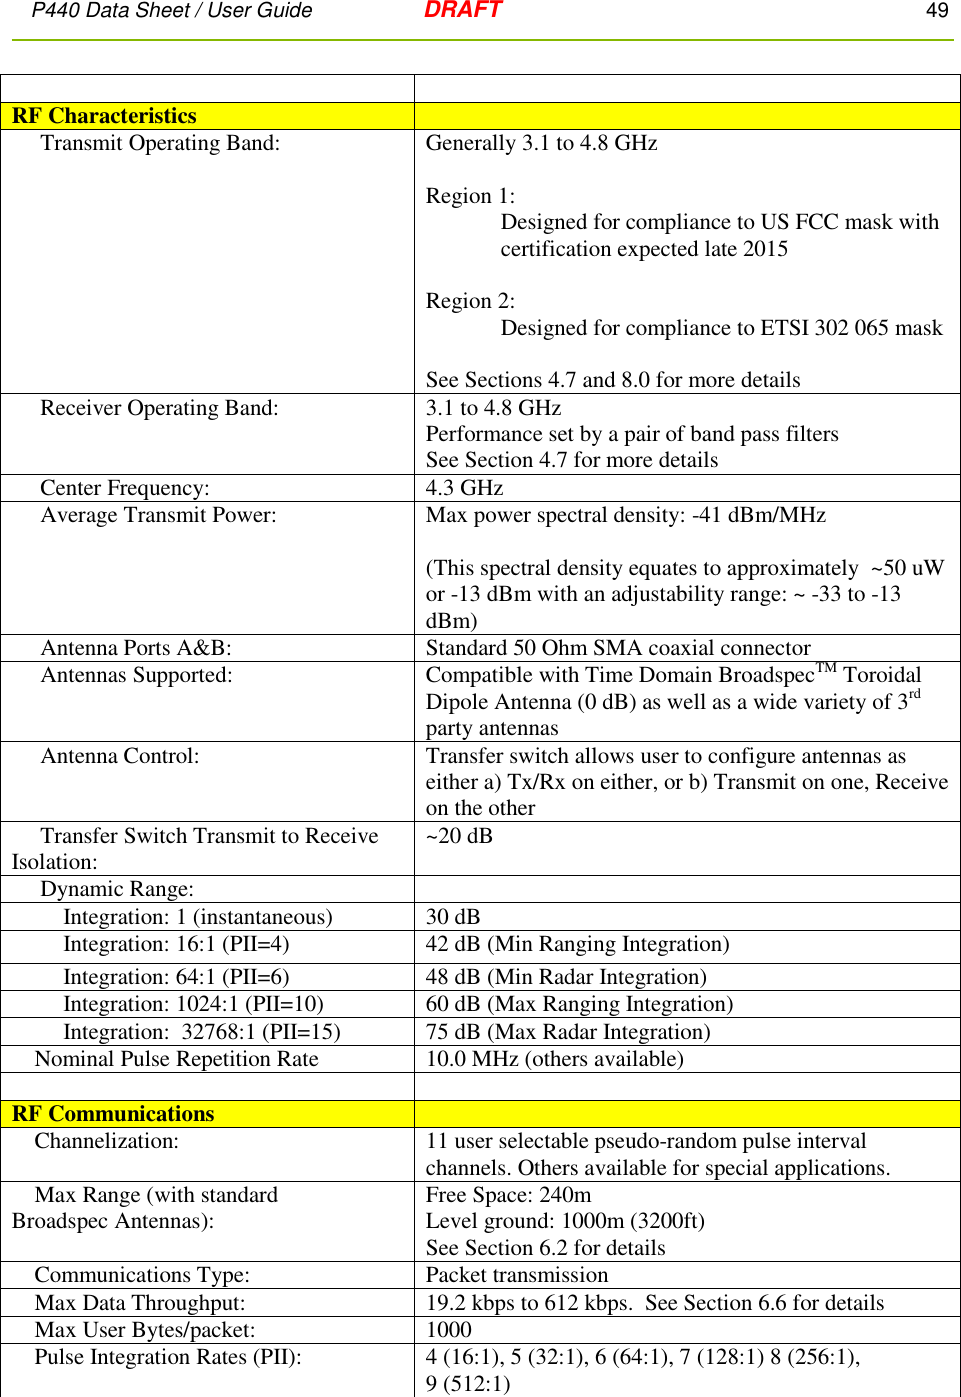 P440 Data Sheet / User Guide   DRAFT    49           RF Characteristics       Transmit Operating Band: Generally 3.1 to 4.8 GHz   Region 1:   Designed for compliance to US FCC mask with certification expected late 2015  Region 2:  Designed for compliance to ETSI 302 065 mask   See Sections 4.7 and 8.0 for more details      Receiver Operating Band: 3.1 to 4.8 GHz Performance set by a pair of band pass filters See Section 4.7 for more details      Center Frequency: 4.3 GHz      Average Transmit Power:  Max power spectral density: -41 dBm/MHz  (This spectral density equates to approximately  ~50 uW or -13 dBm with an adjustability range: ~ -33 to -13 dBm)      Antenna Ports A&amp;B:  Standard 50 Ohm SMA coaxial connector      Antennas Supported: Compatible with Time Domain BroadspecTM Toroidal Dipole Antenna (0 dB) as well as a wide variety of 3rd party antennas      Antenna Control: Transfer switch allows user to configure antennas as either a) Tx/Rx on either, or b) Transmit on one, Receive on the other      Transfer Switch Transmit to Receive Isolation: ~20 dB      Dynamic Range:           Integration: 1 (instantaneous)  30 dB          Integration: 16:1 (PII=4) 42 dB (Min Ranging Integration)          Integration: 64:1 (PII=6)   48 dB (Min Radar Integration)          Integration: 1024:1 (PII=10) 60 dB (Max Ranging Integration)          Integration:  32768:1 (PII=15) 75 dB (Max Radar Integration)     Nominal Pulse Repetition Rate 10.0 MHz (others available)    RF Communications      Channelization: 11 user selectable pseudo-random pulse interval channels. Others available for special applications.     Max Range (with standard Broadspec Antennas):  Free Space: 240m Level ground: 1000m (3200ft)   See Section 6.2 for details     Communications Type: Packet transmission     Max Data Throughput: 19.2 kbps to 612 kbps.  See Section 6.6 for details     Max User Bytes/packet: 1000     Pulse Integration Rates (PII): 4 (16:1), 5 (32:1), 6 (64:1), 7 (128:1) 8 (256:1),  9 (512:1) 